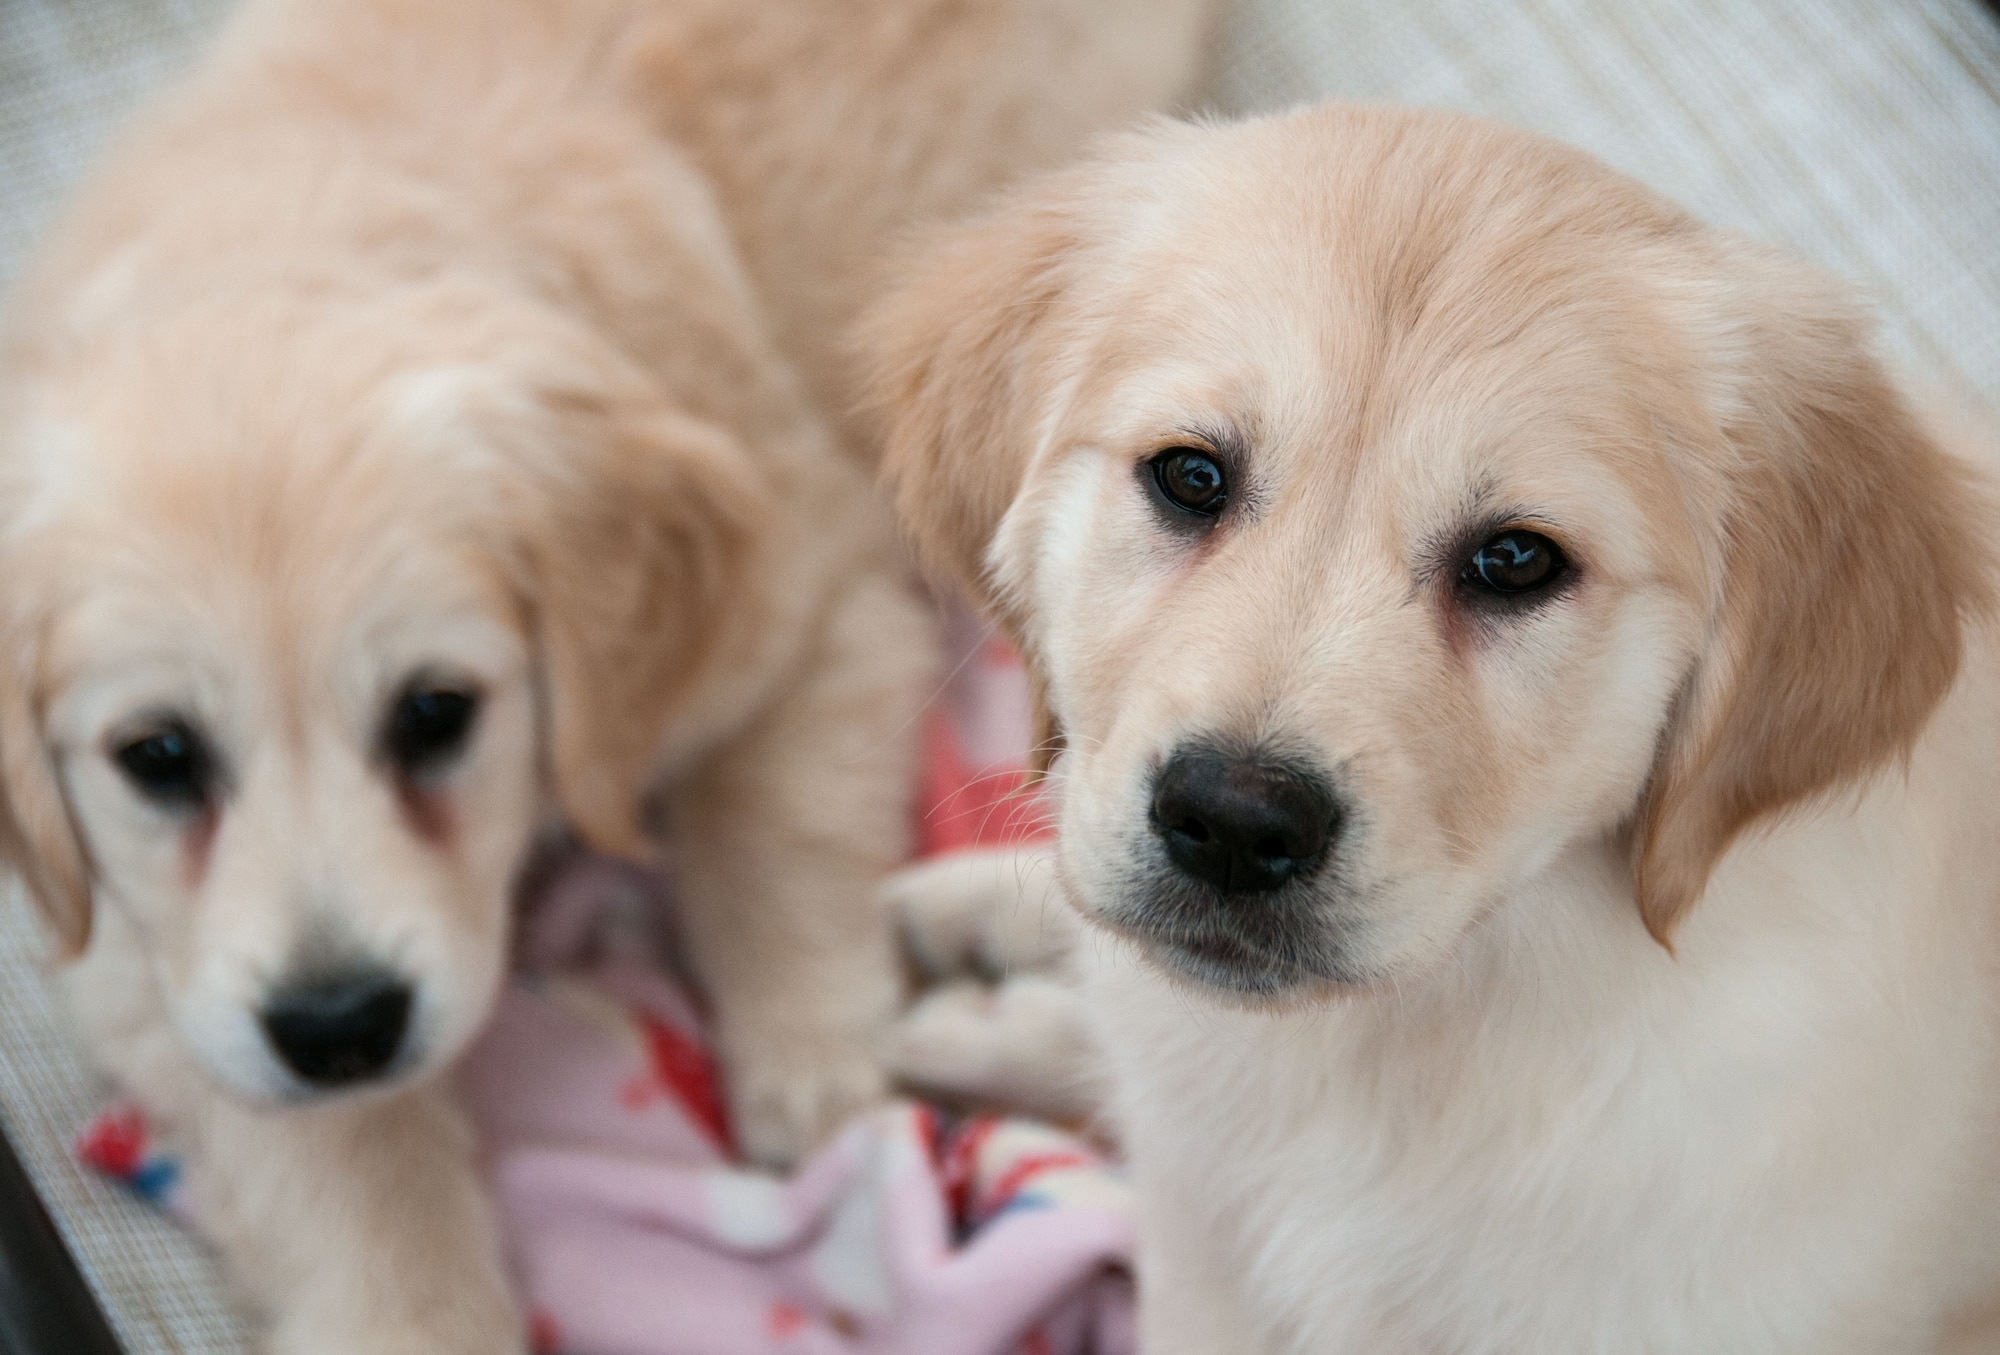 These two golden retriever puppies are some of the newest recruits for Warrior Canine Connection, a nonprofit that trains service dogs to help wounded warriors. Research has shown that dogs can help with the physical and emotional effects of traumatic injuries. (U.S. Air Force photo/Sean Kimmons) 